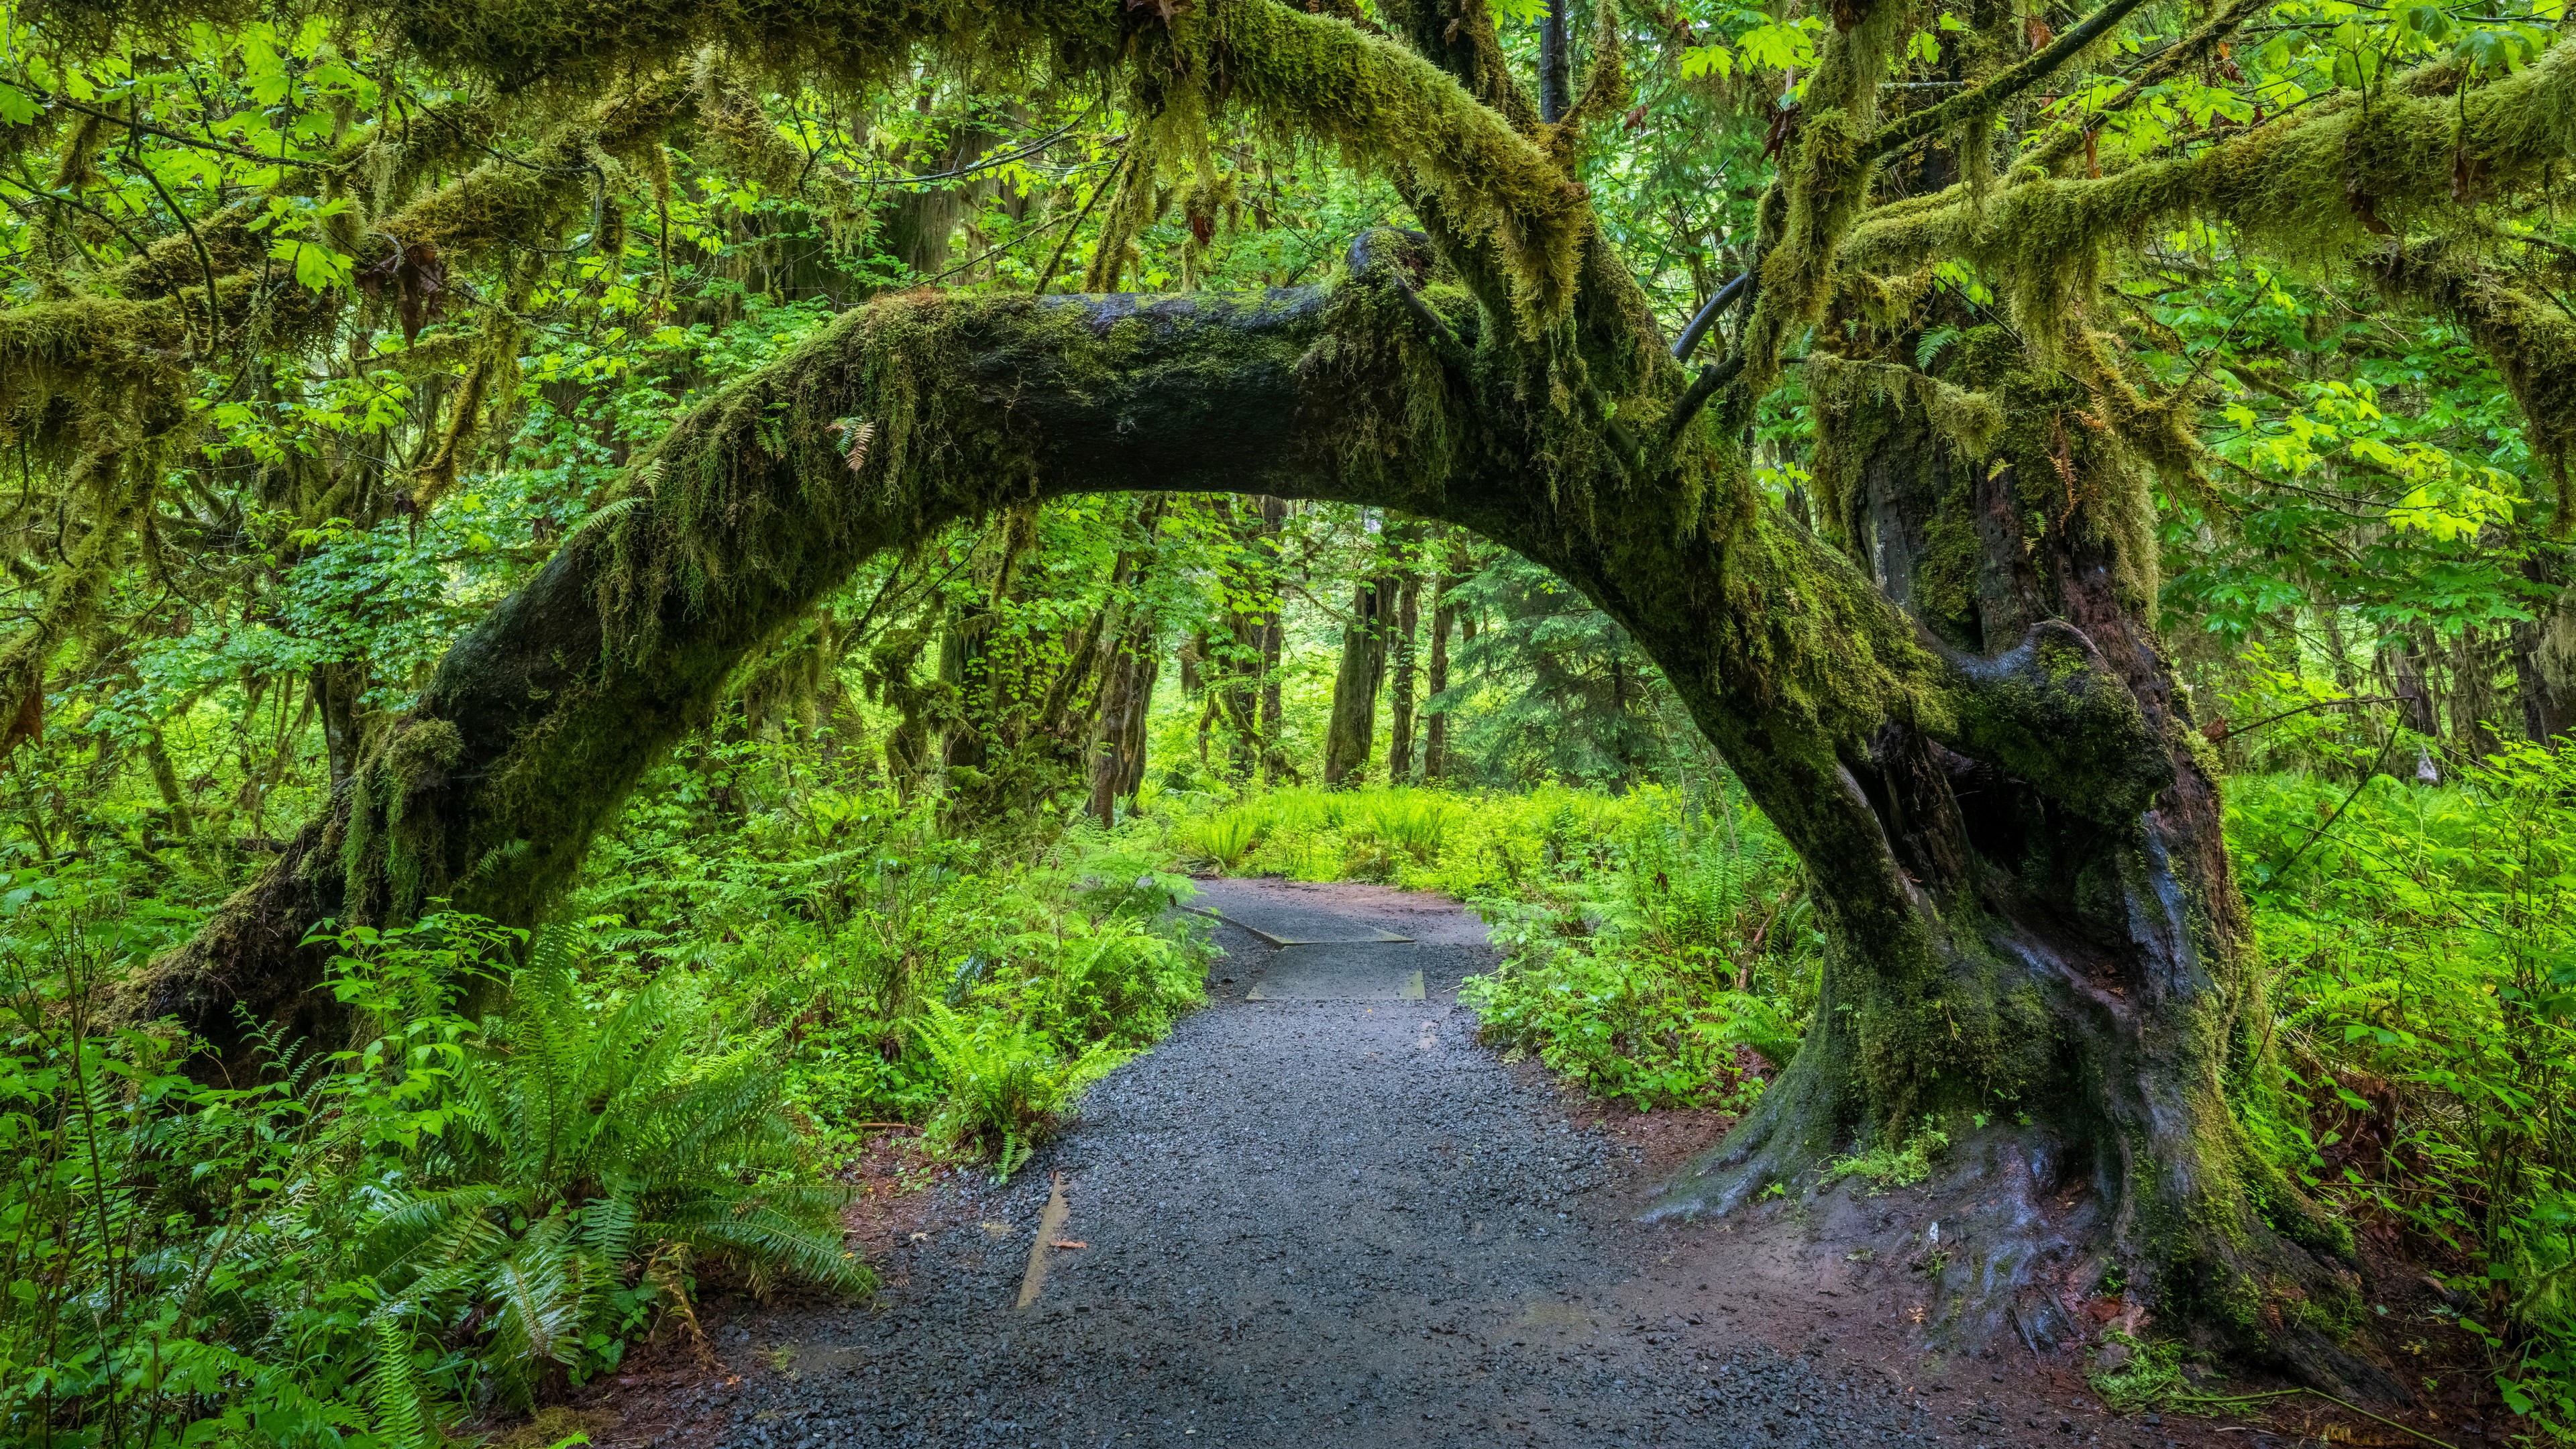 General 3840x2160 Olympic National Park USA Washington nature forest trees moss plants path